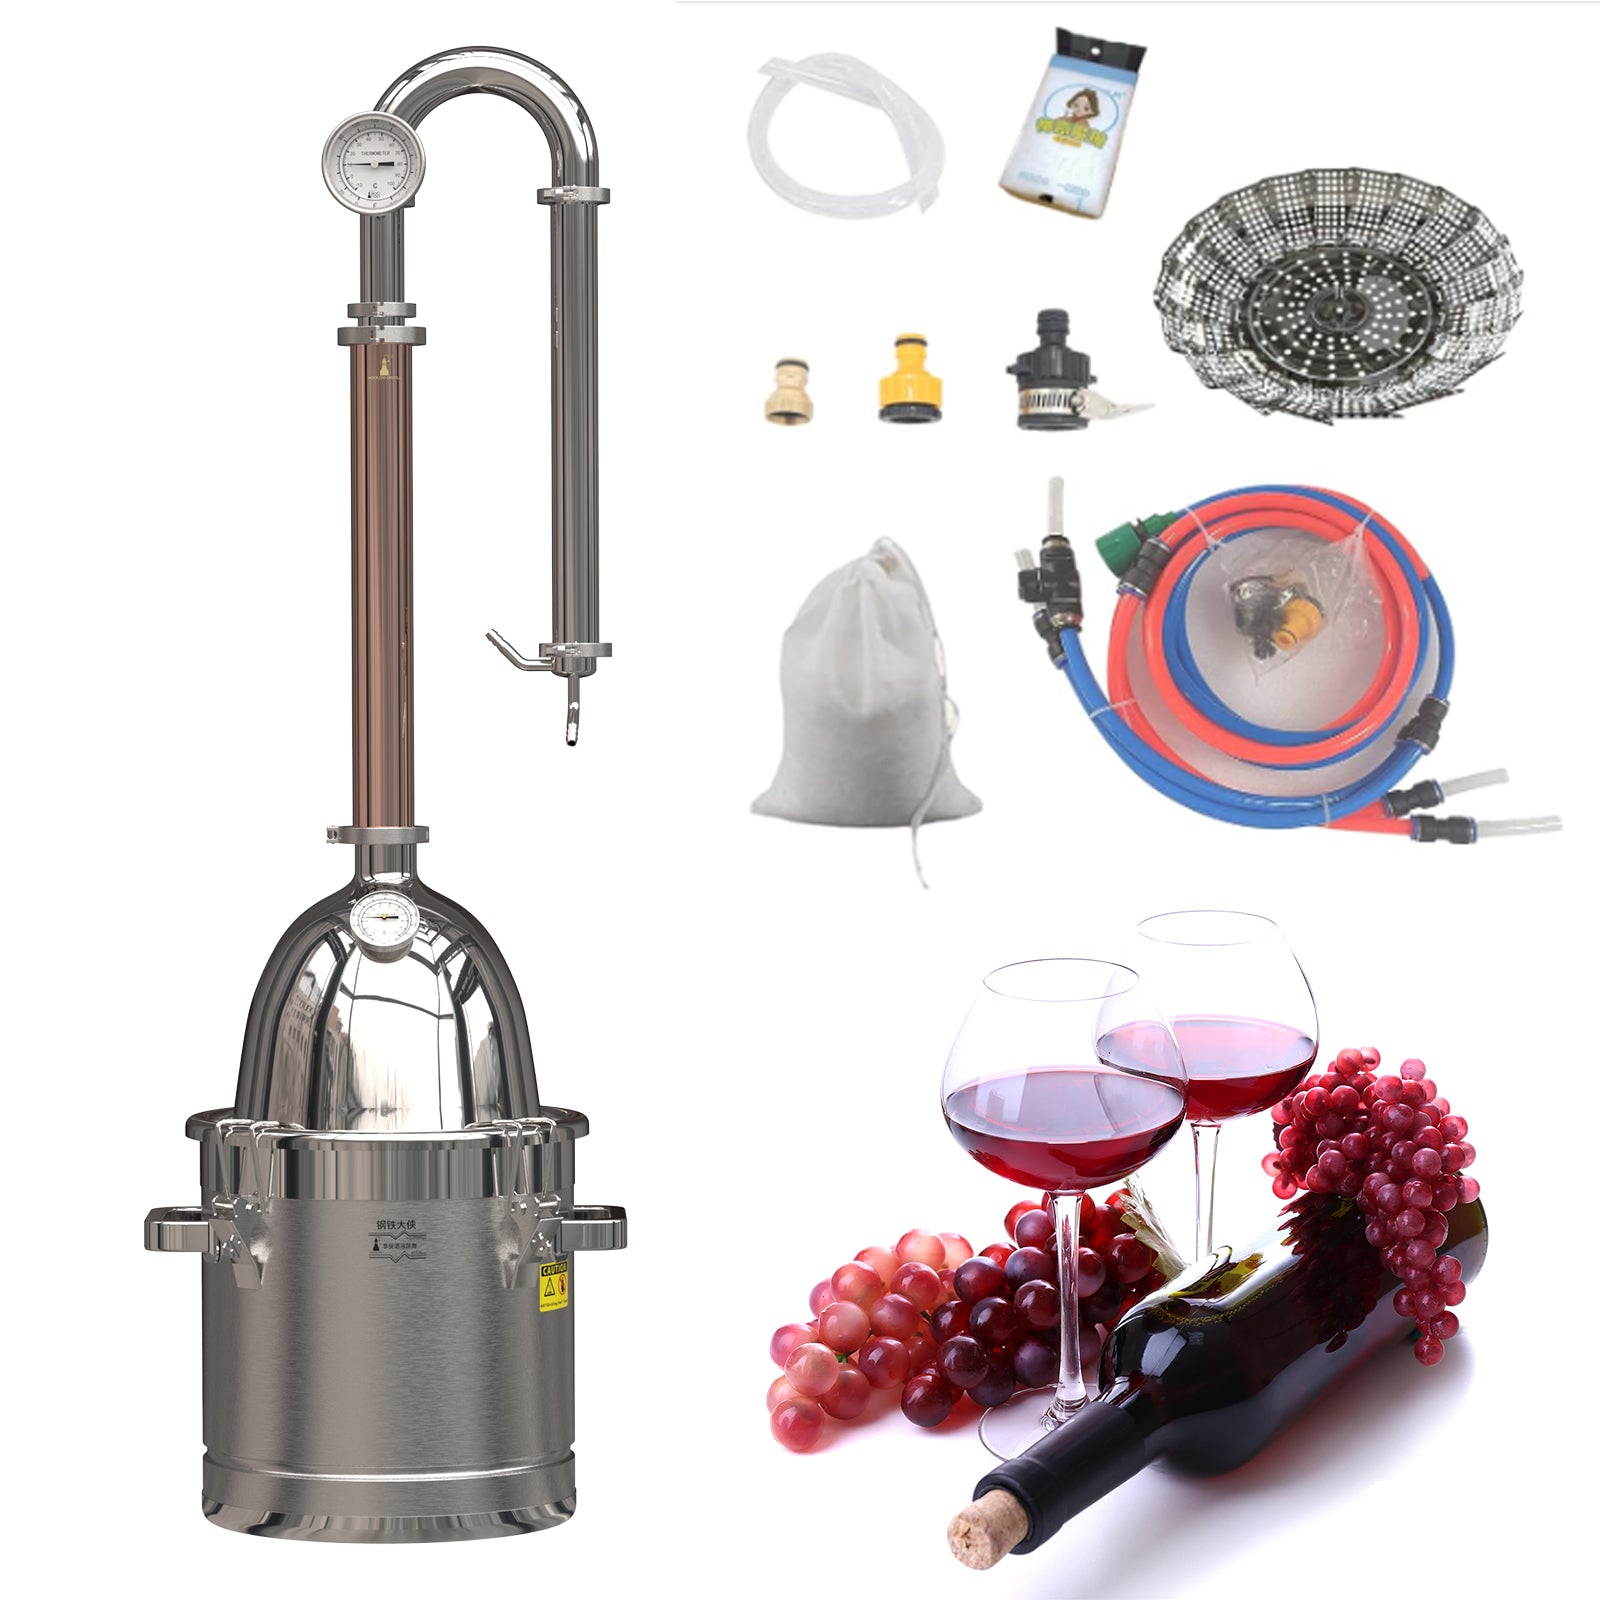 HOOLOO 5.8Gal /22L Alcohol Distiller for Home Distilling Kit Stainless